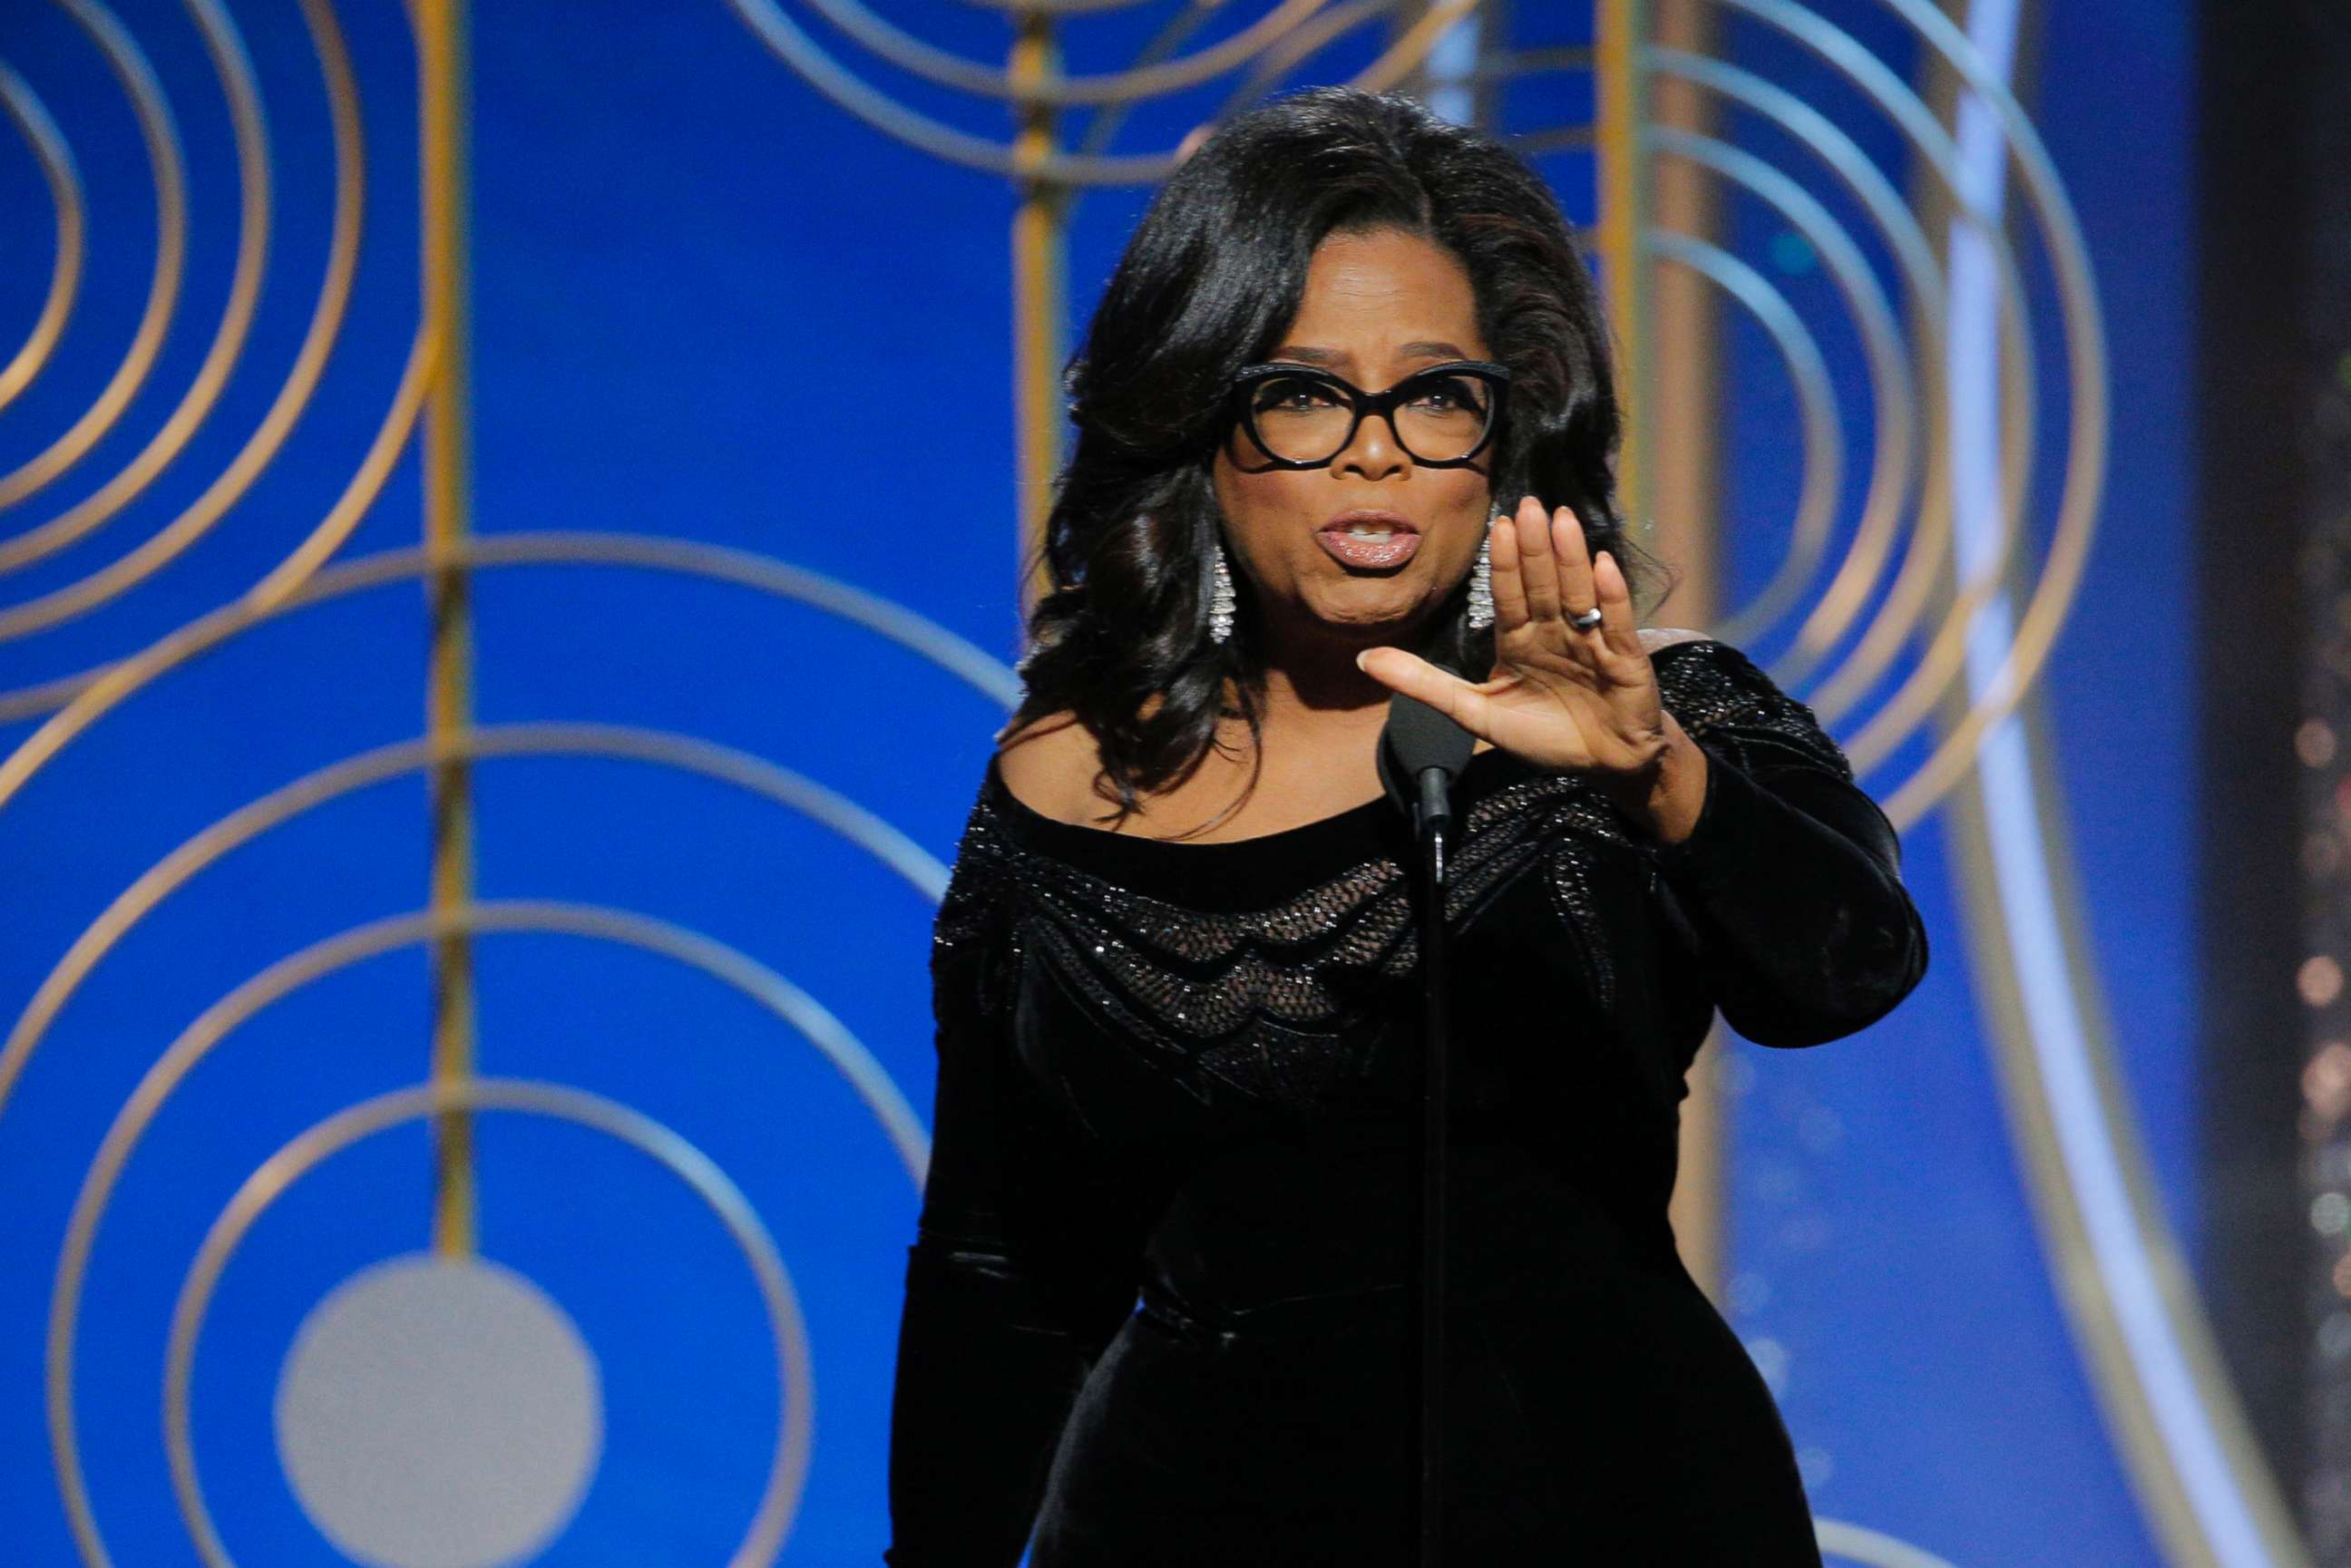 PHOTO: Oprah Winfrey accepts the Cecil B. Demille award at the 75th annual Golden Globe awards, Jan. 7, 2018, in Beverly Hills, Calif.